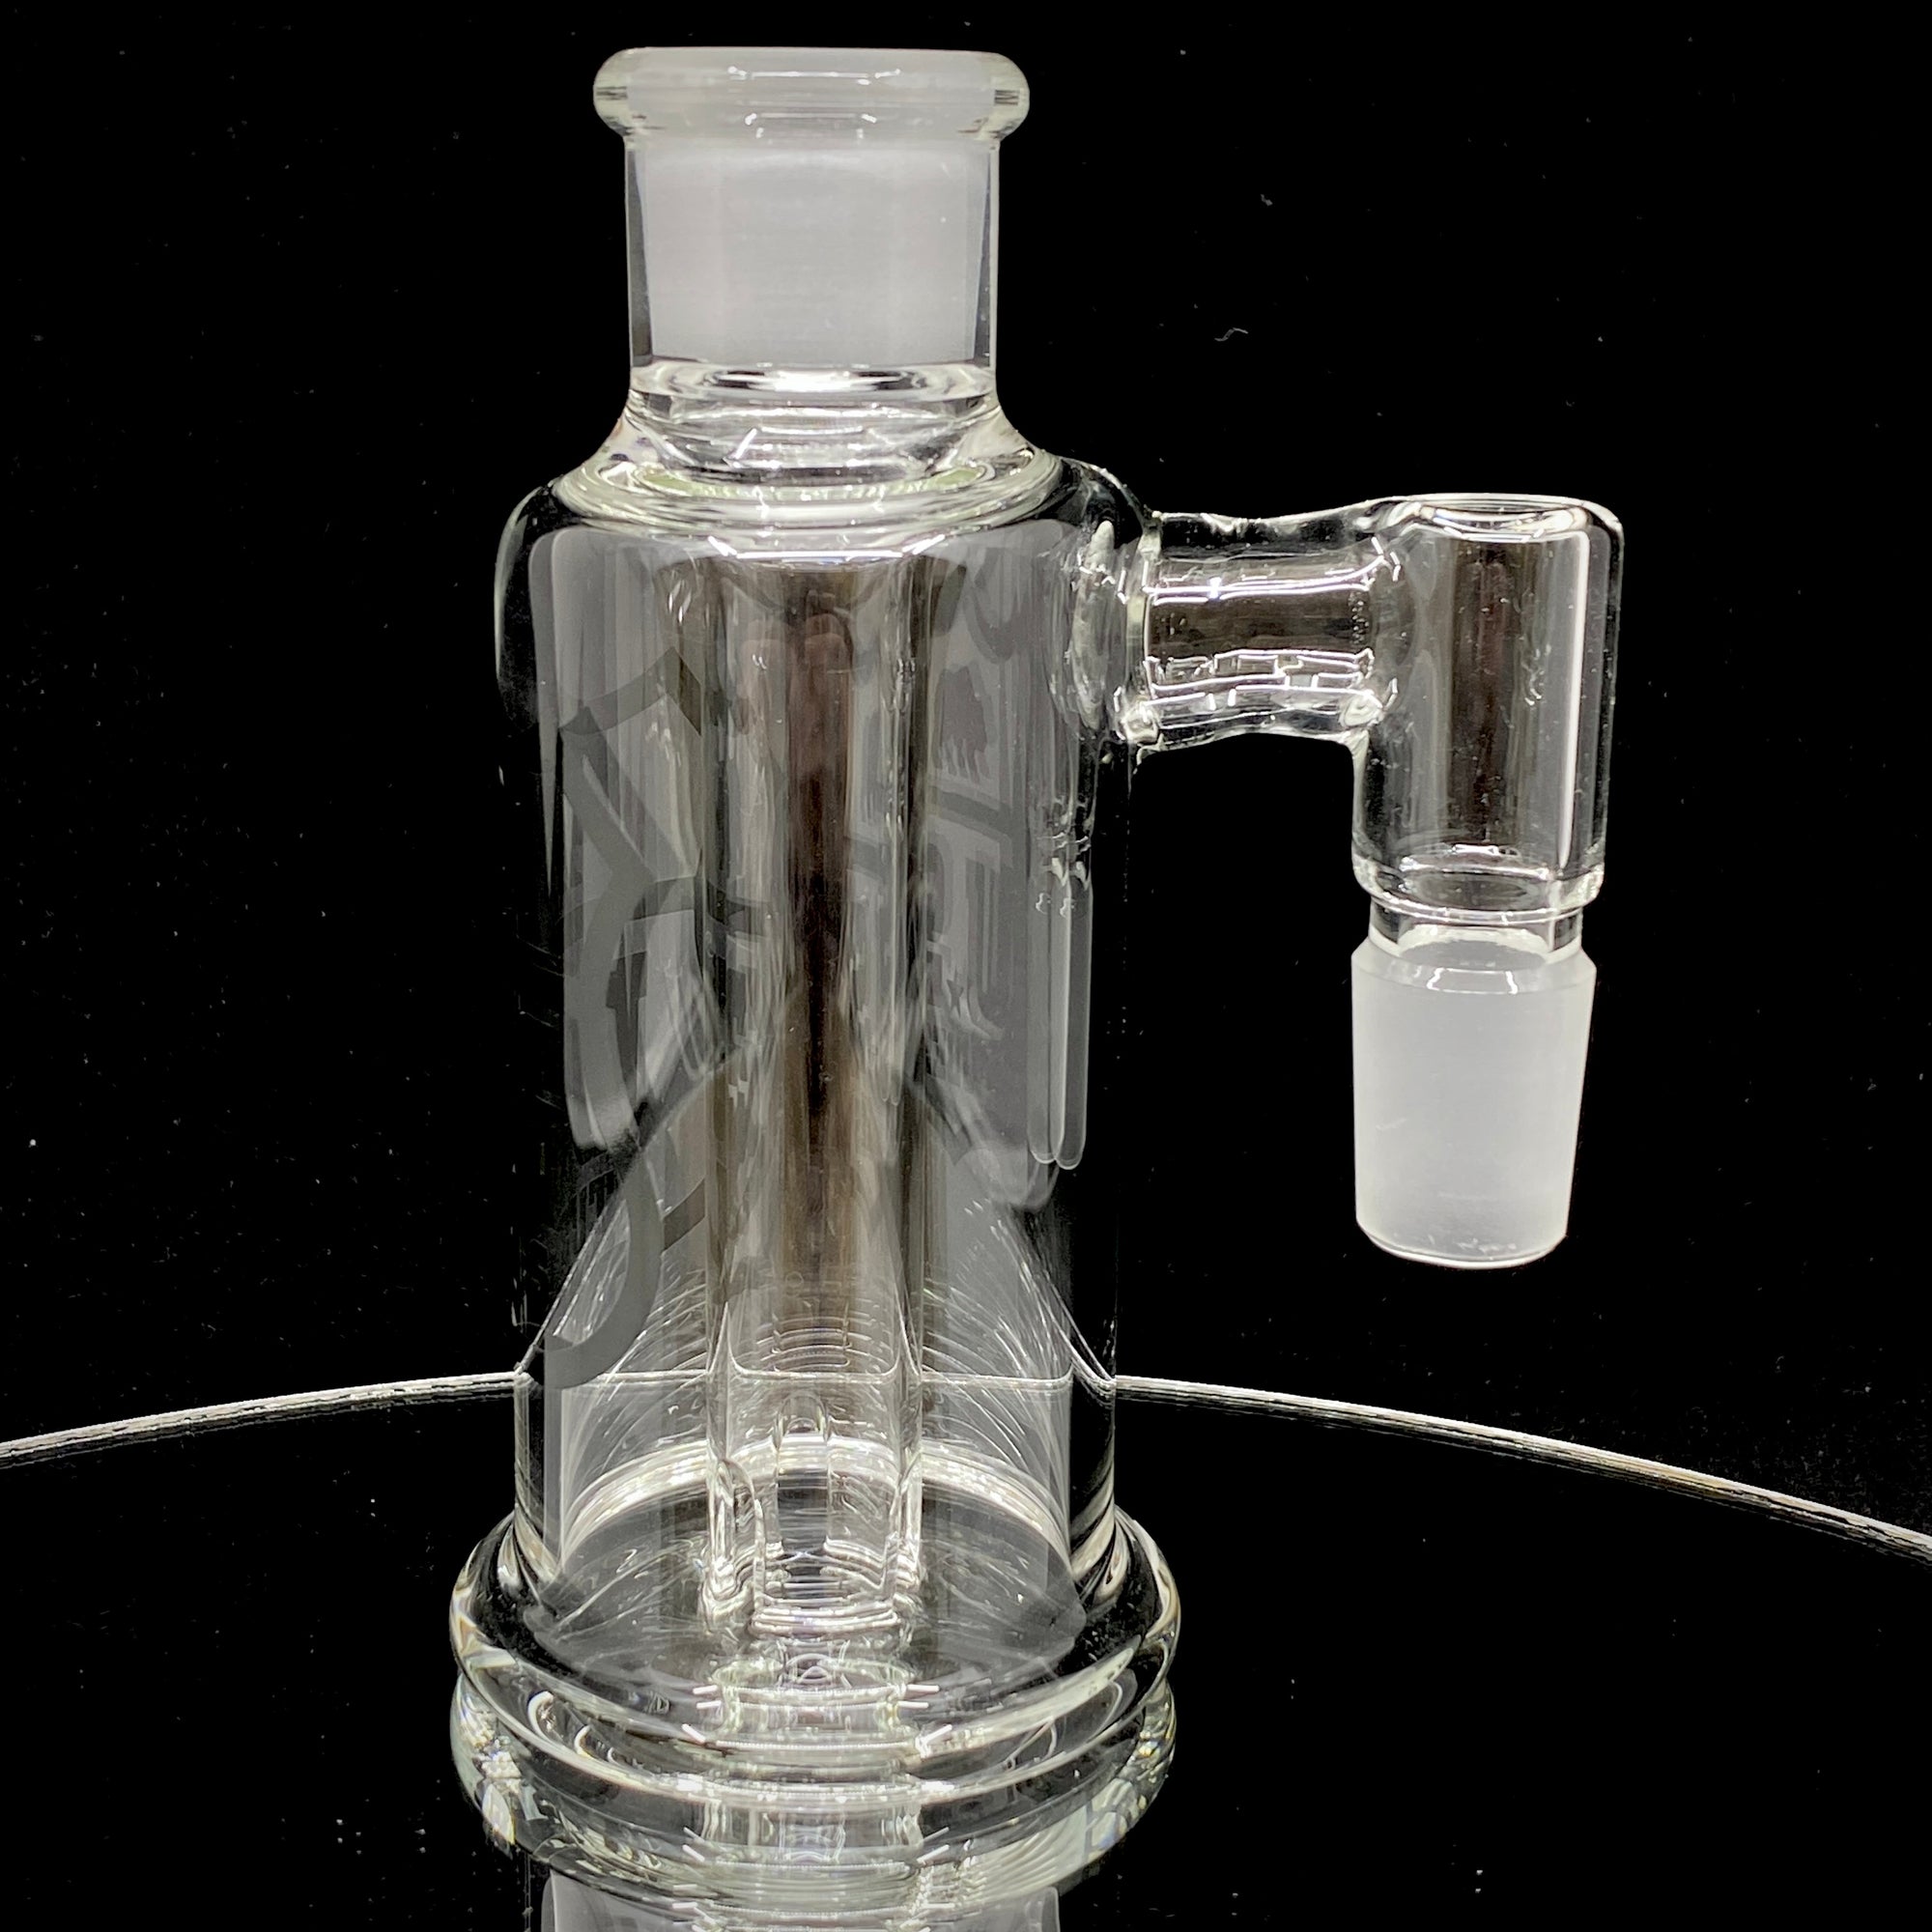 US Tubes Ash catcher, 19mm Joint, 90 Degree